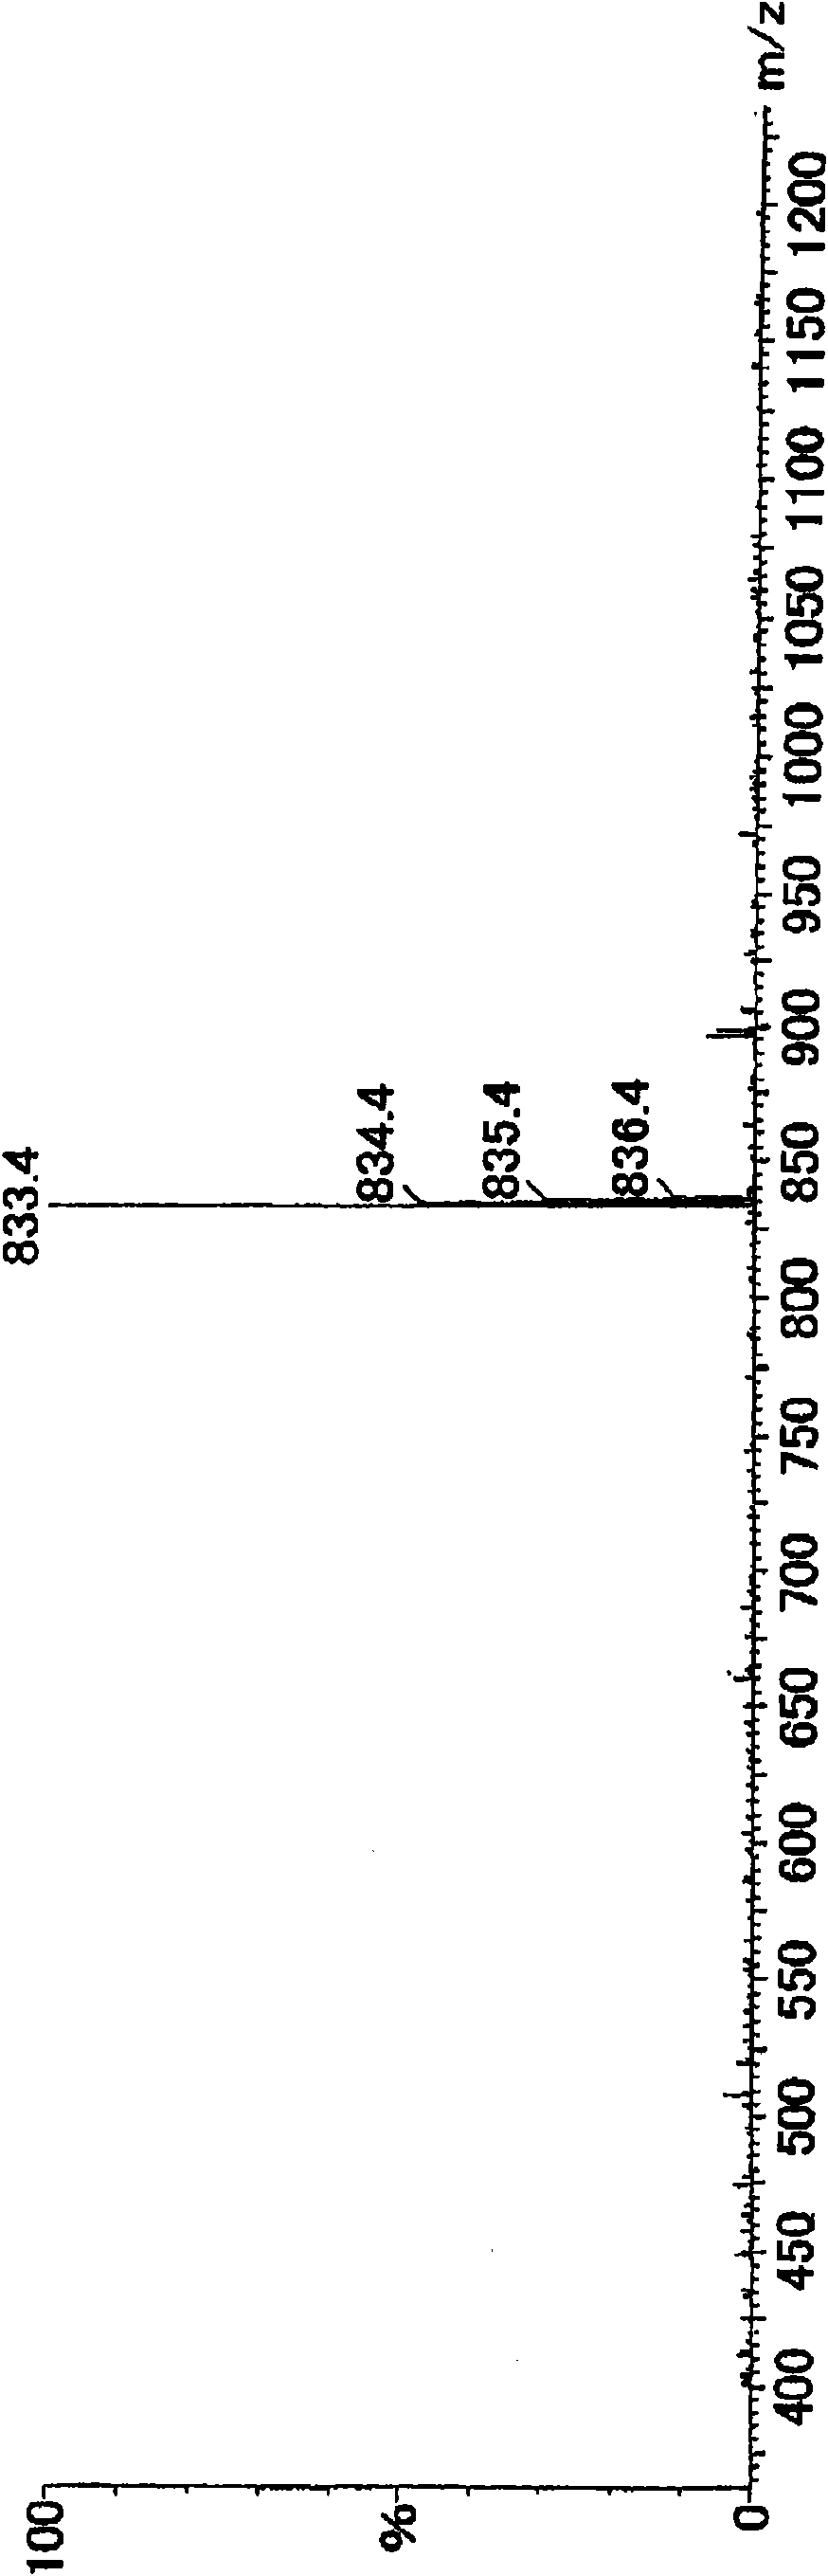 Process for production of oxidized cyclic phenol sulfide